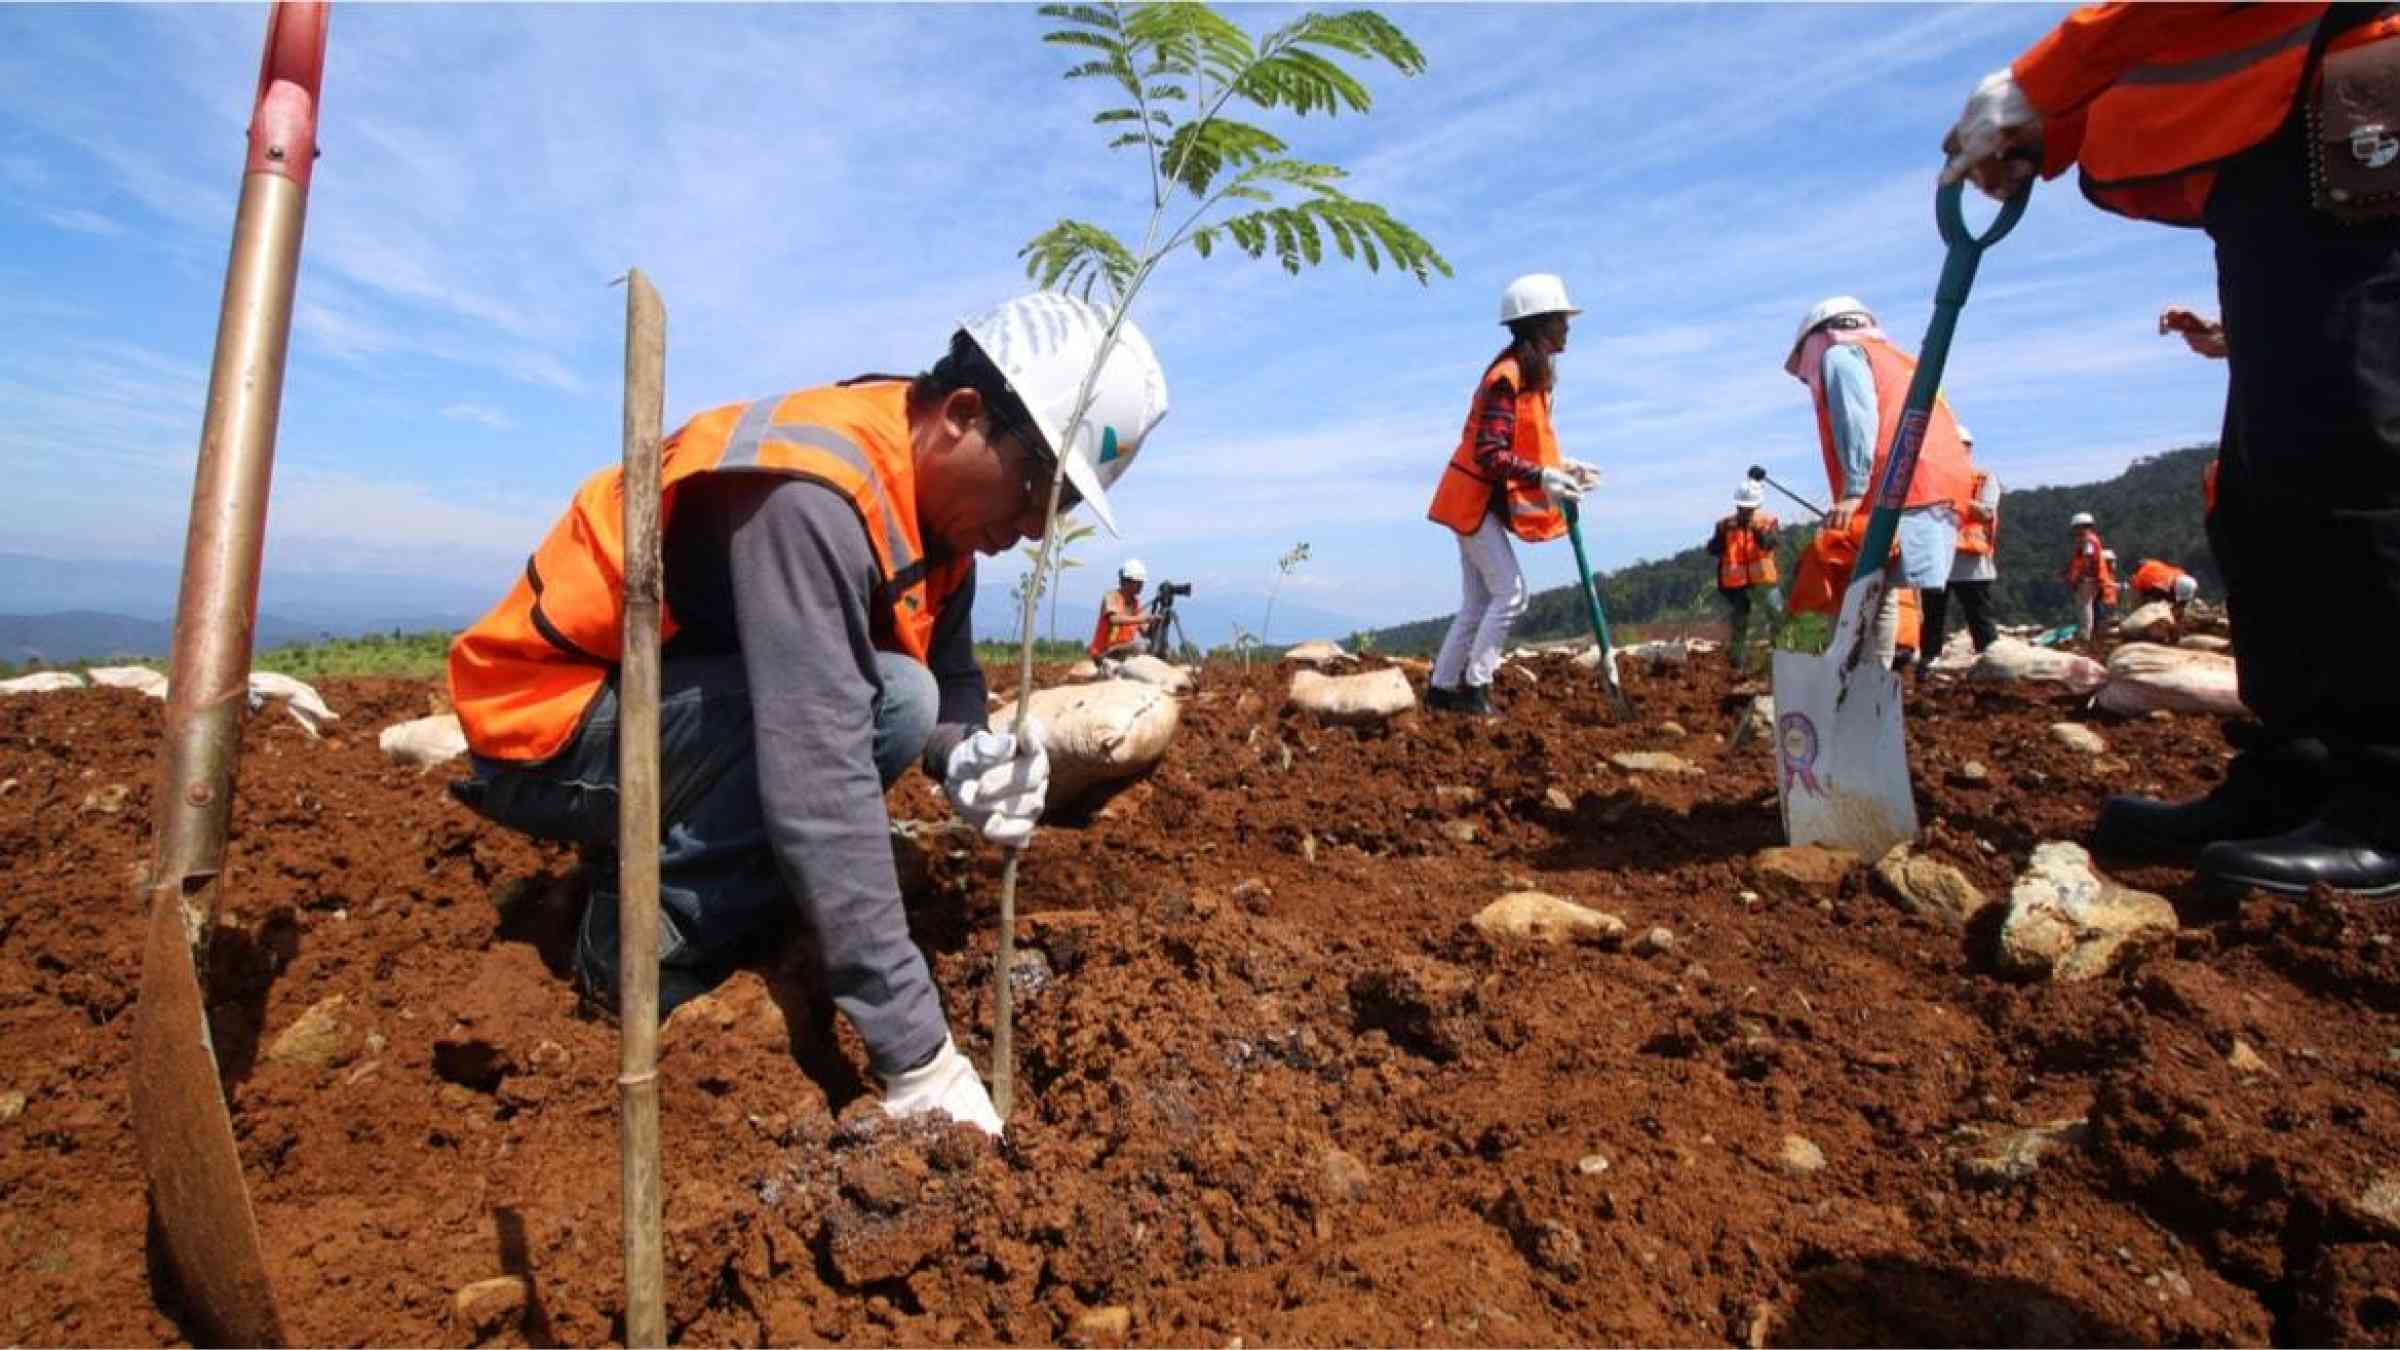 Workers plant trees in a former nickel mining site